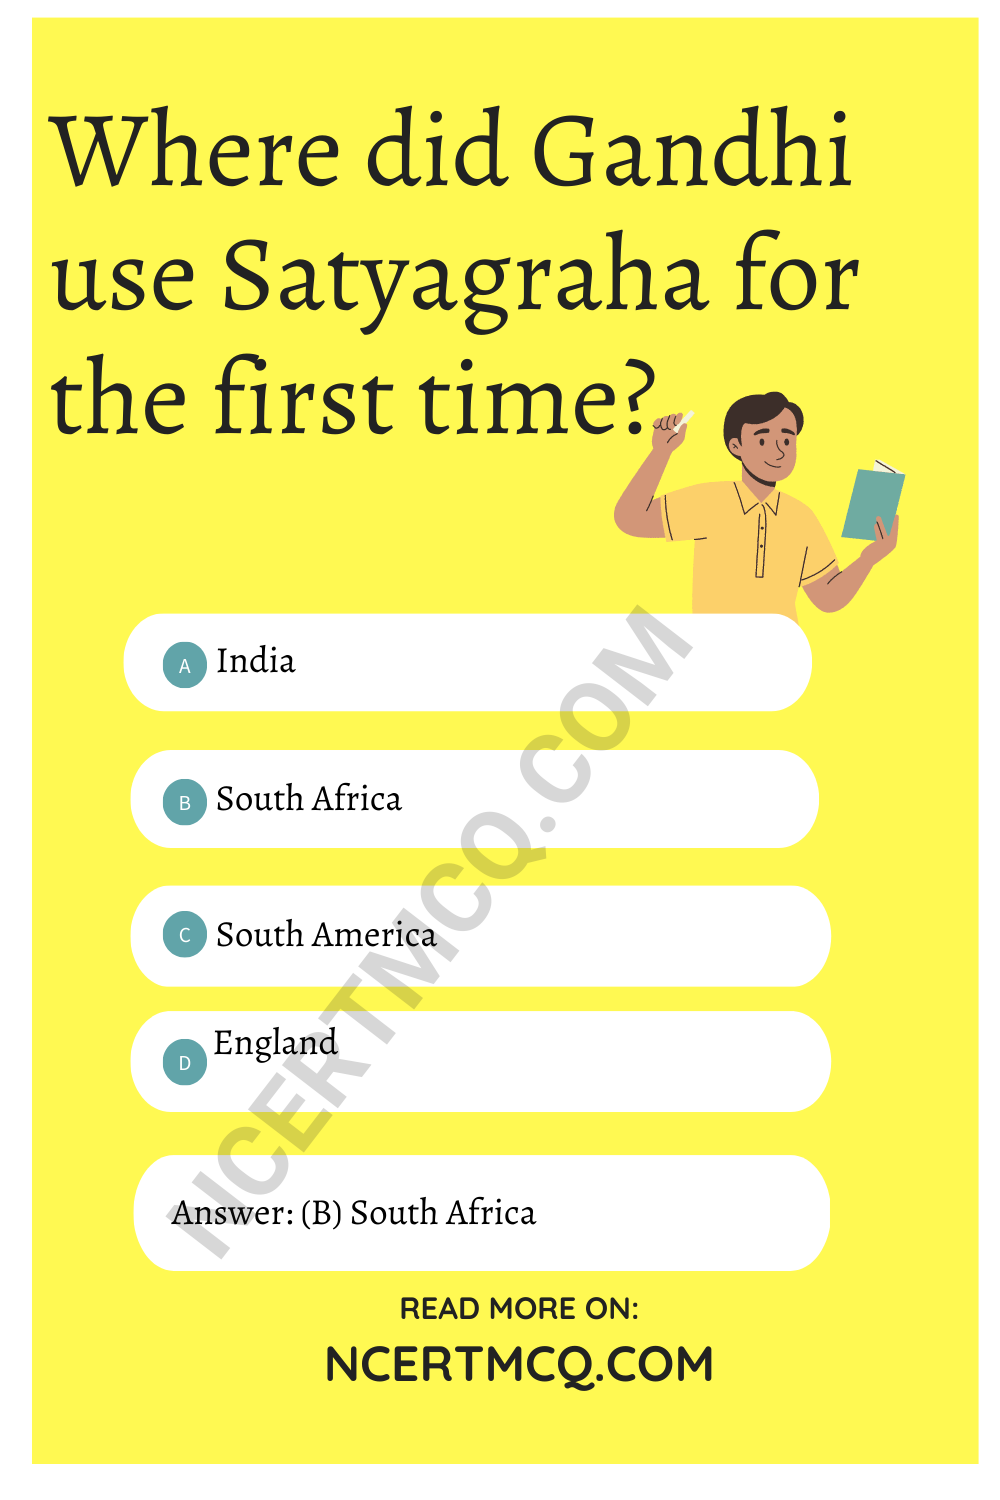 Where did Gandhi use Satyagraha for the first time?